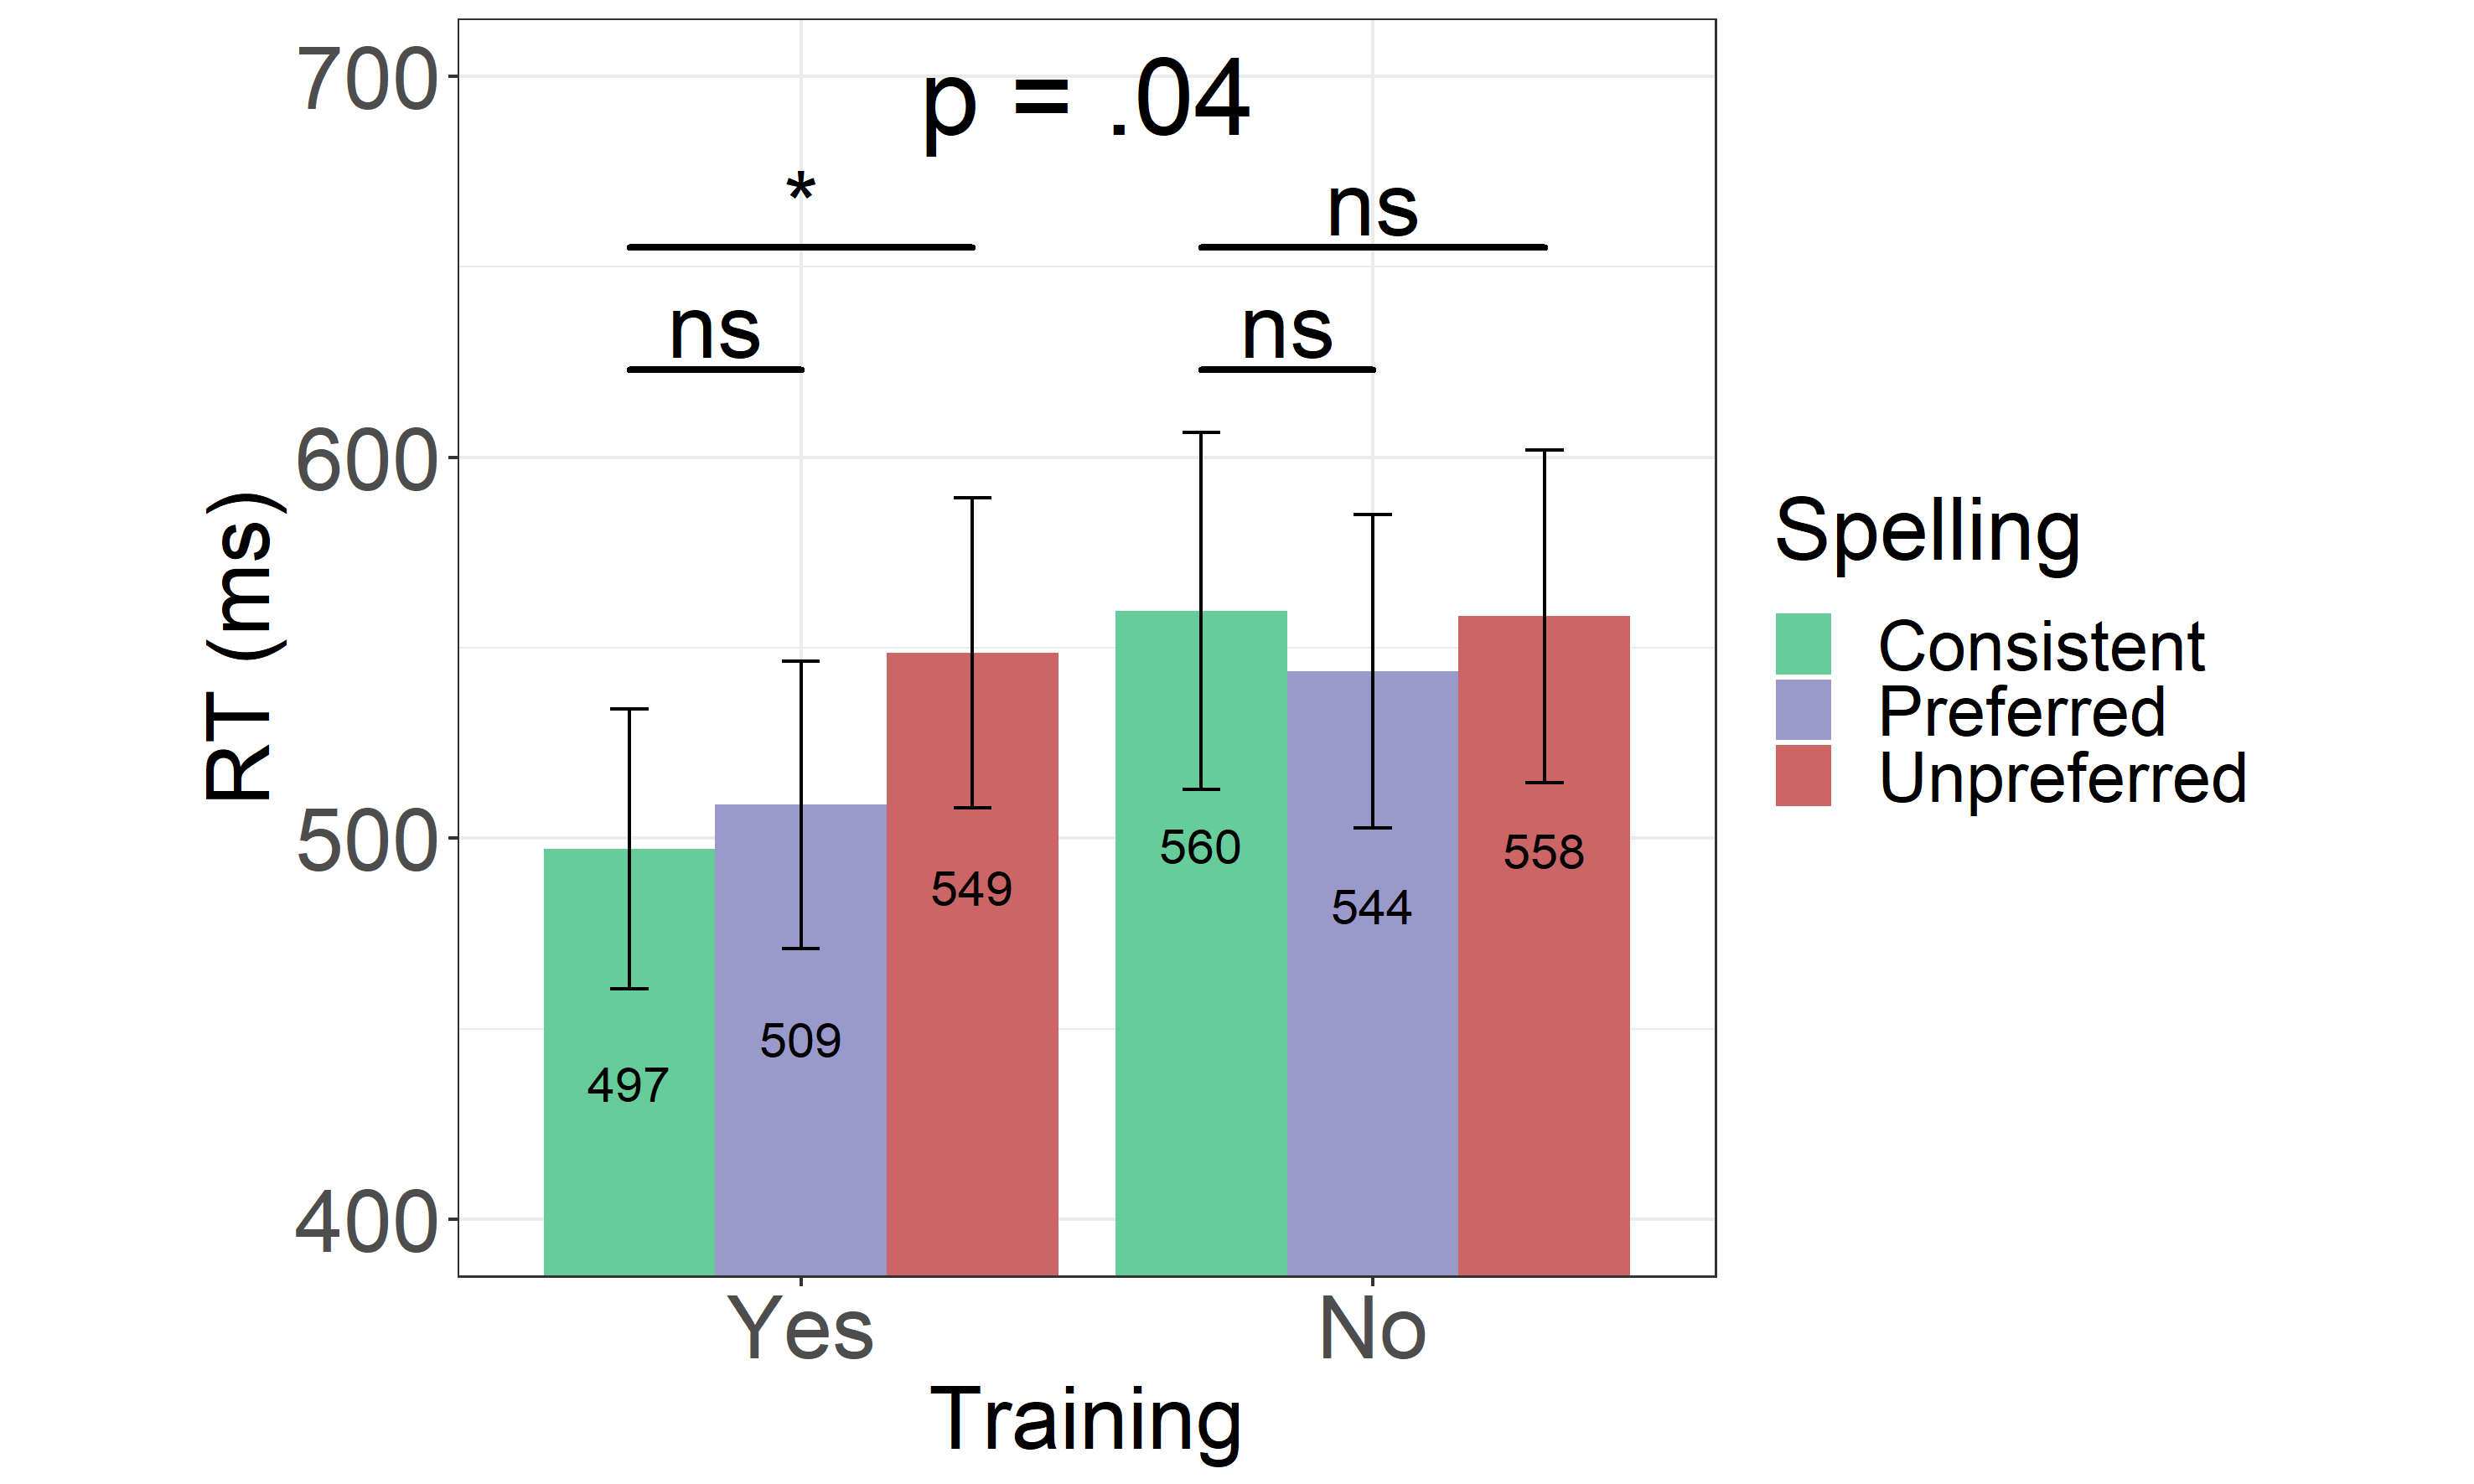 Reaction Times From the Experiment 2. Reaction times for both trained (Yes) and untrained (No) consistent, preferred and unpreferred word spellings. Error bars represent the standard error of the mean.